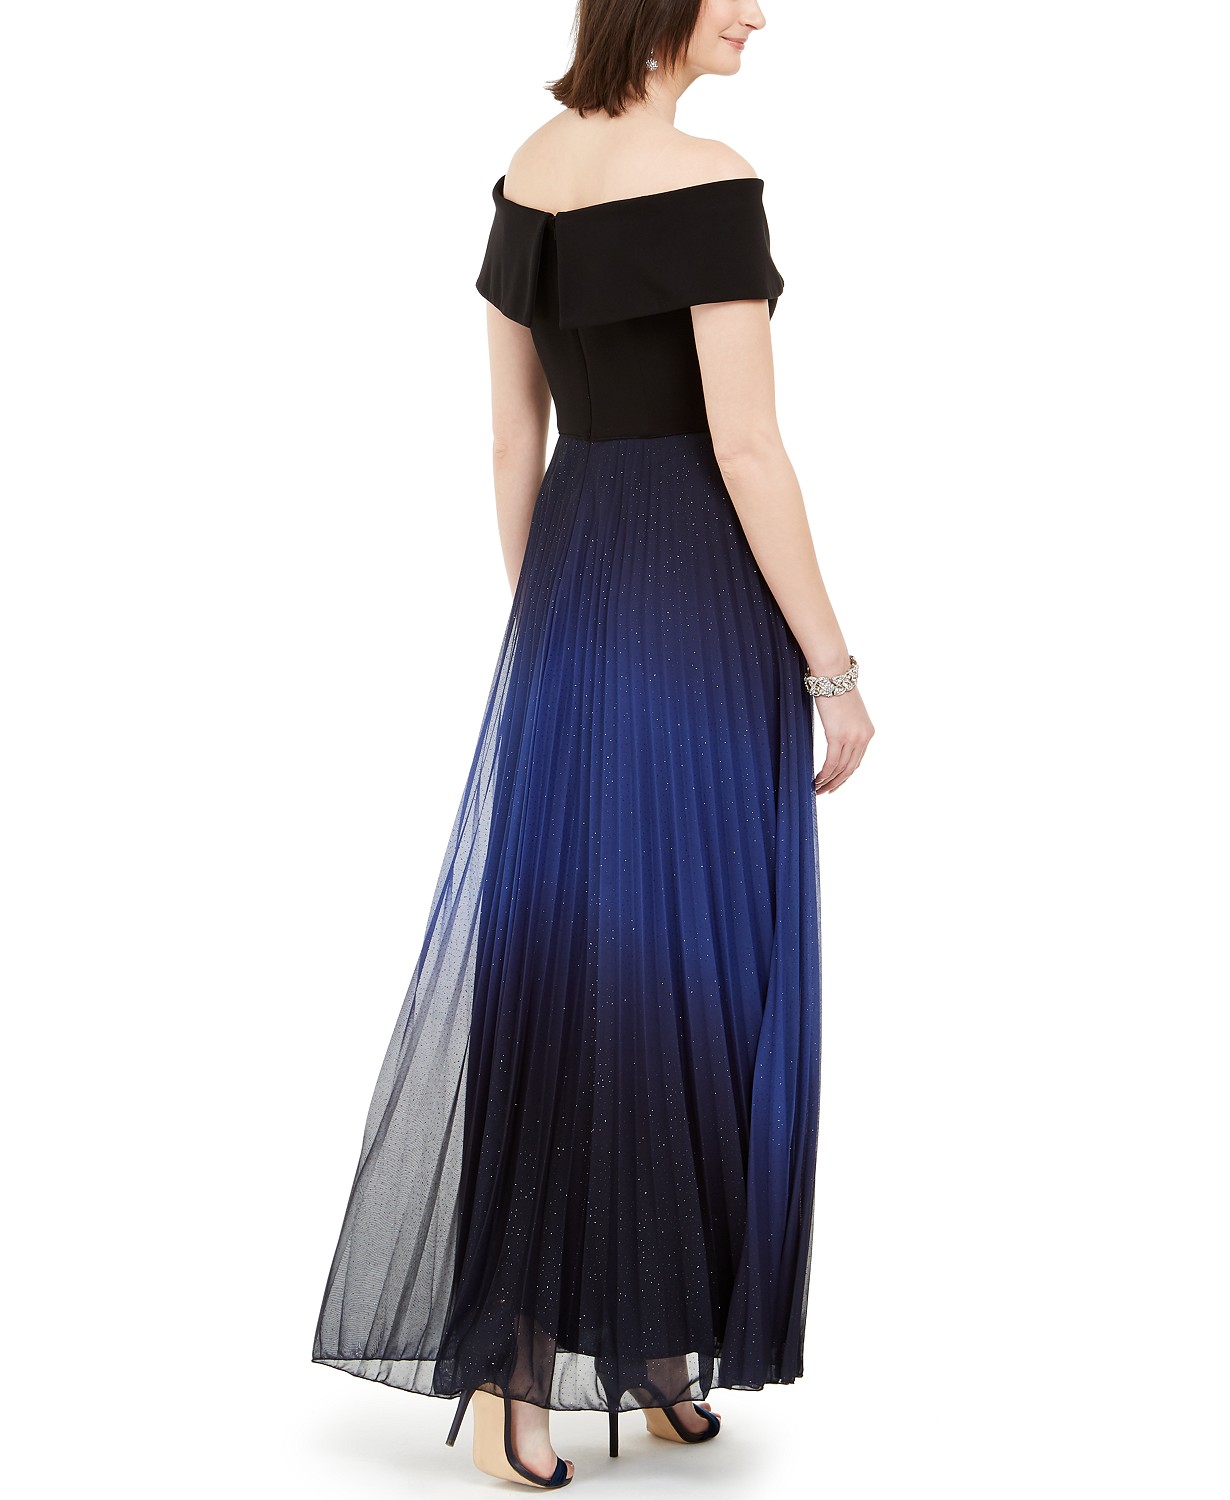 woocommerce-673321-2209615.cloudwaysapps.com-betsy-amp-adam-womens-navy-off-the-shoulder-pleated-glitter-gown-dress